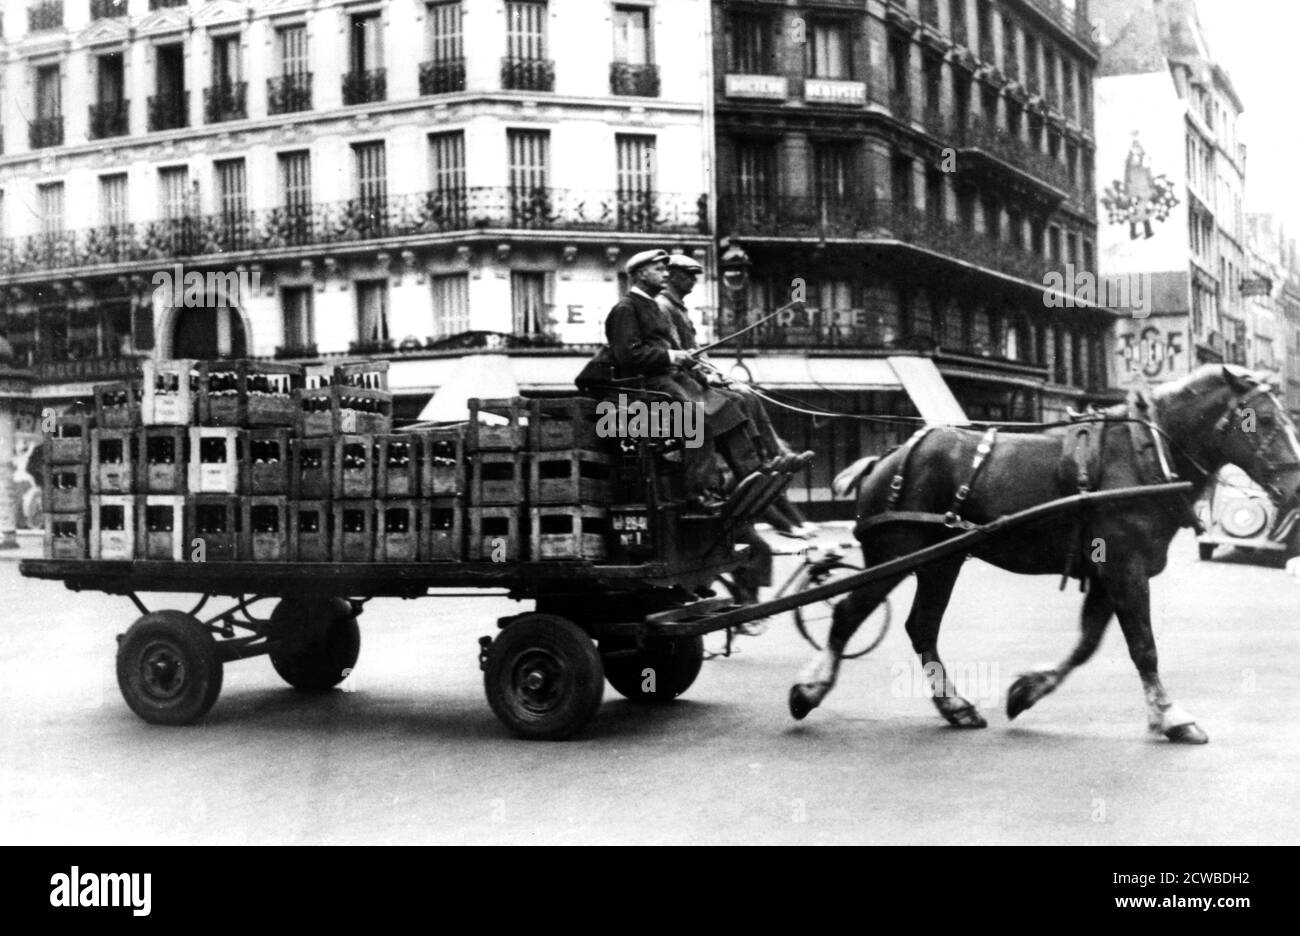 Horse-drawn cart carrying crates of drink, German-occupied Paris, July 1940. Under the German occupation, petrol was unobtainable. Only police cars and certain vehicles carrying food supplies were allowed to travel. Horse-drawn vehicles and bicycles became the most common modes of transport. The photographer is unknown. Stock Photo